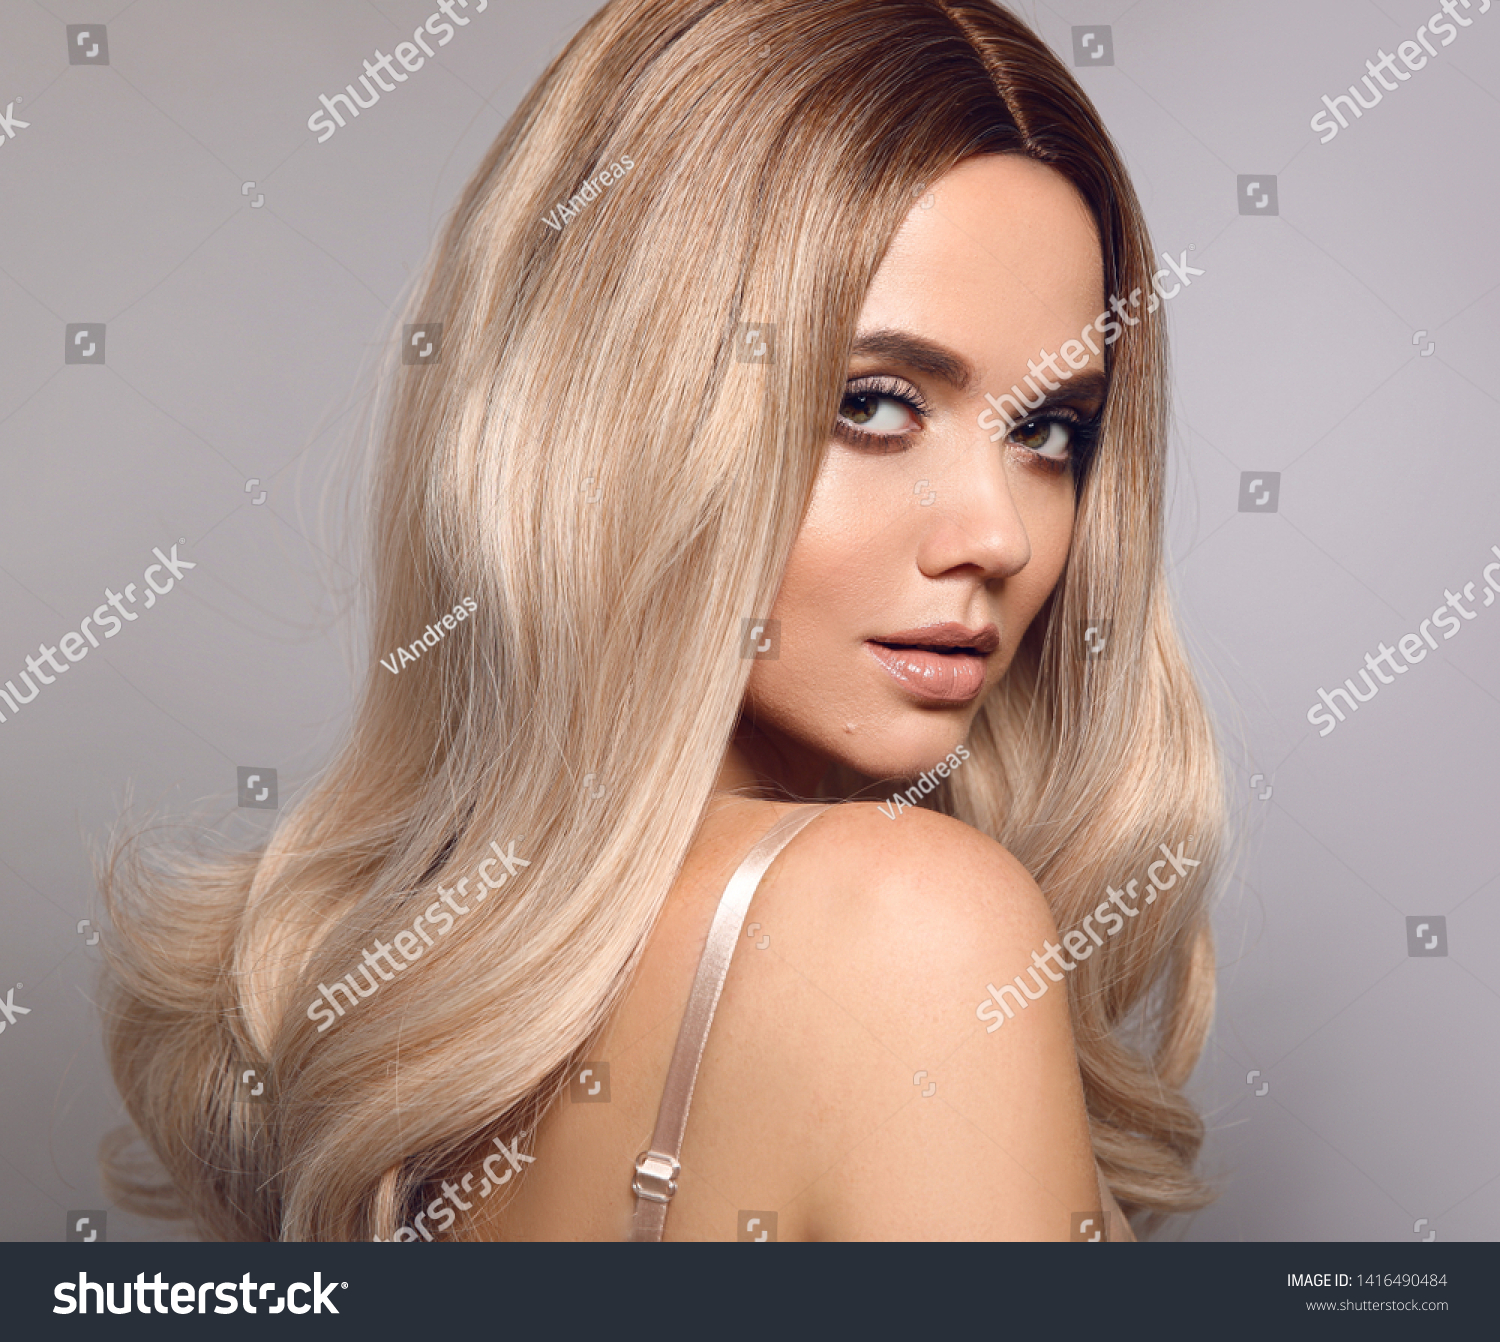 Ombre blond shiny hair. Beauty fashion blonde woman portrait. Beautiful girl model with makeup, long healthy hairstyle posing isolated on studio grey background. #1416490484